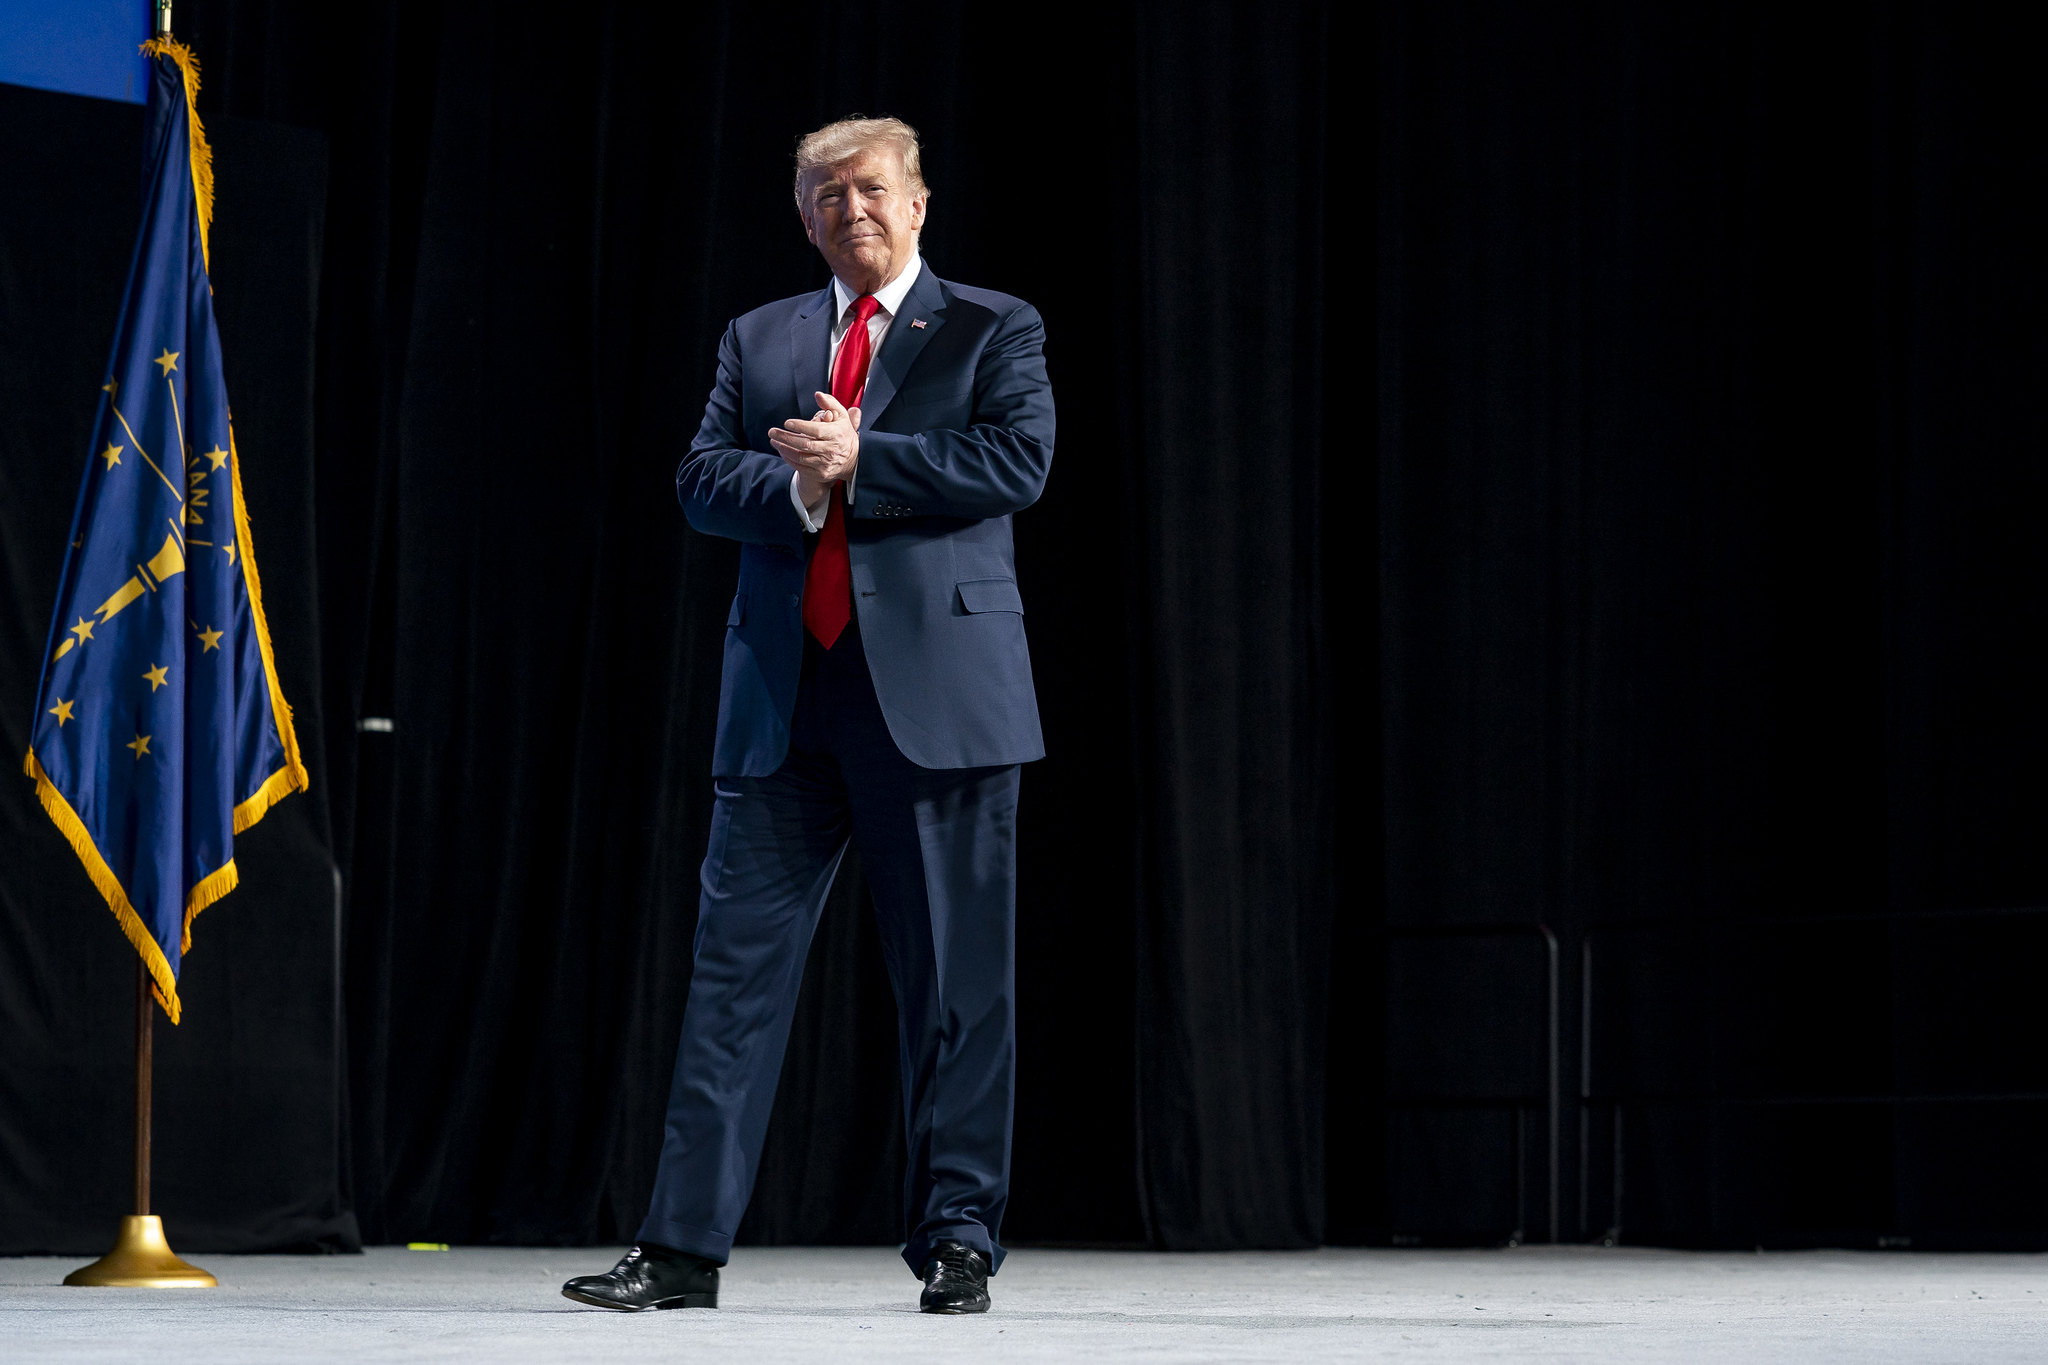 President Donald Trump at NRA Annual Meeting